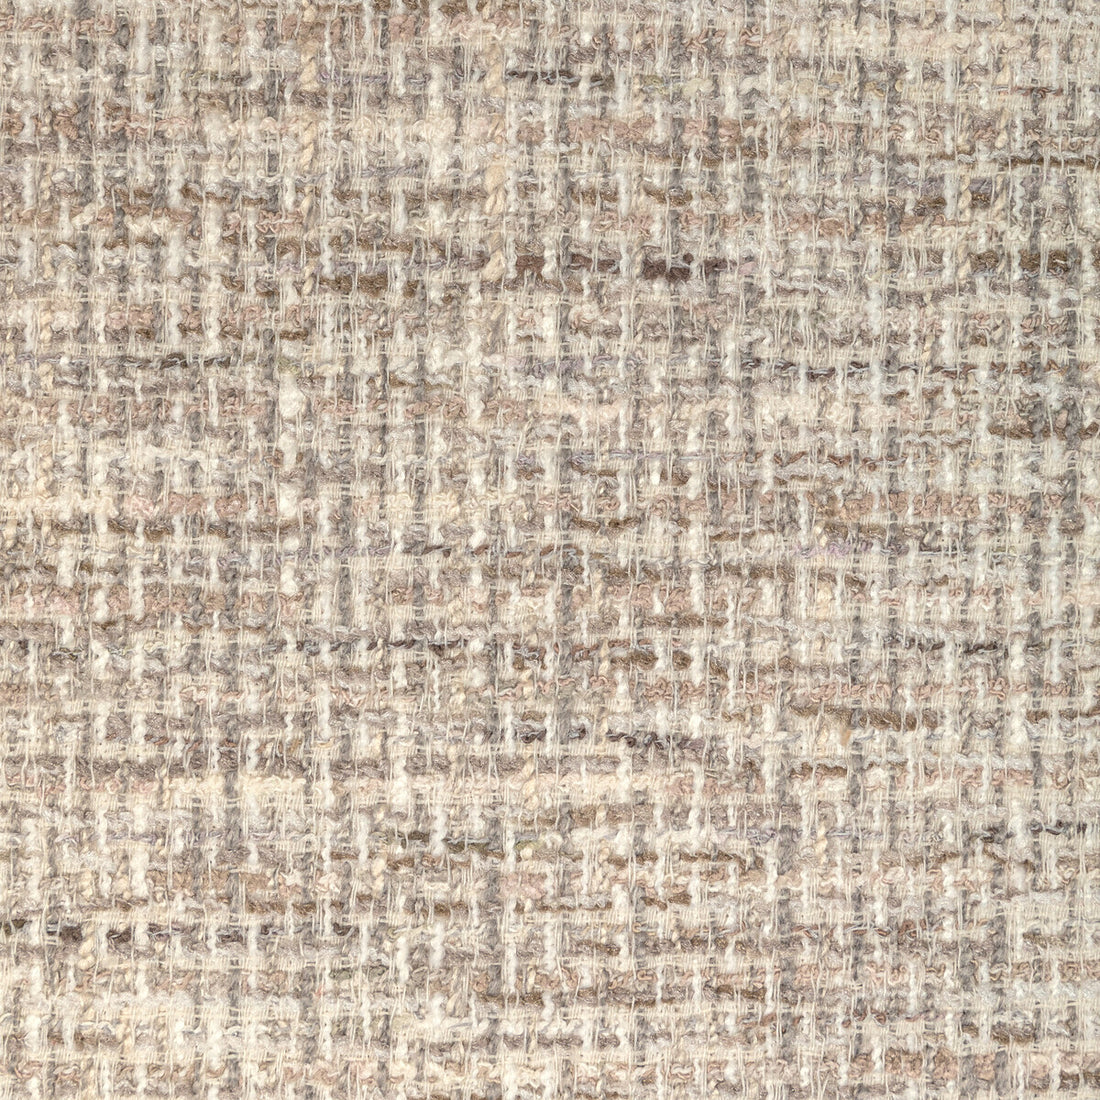 Salvadore fabric in alabaster color - pattern 36749.11.0 - by Kravet Contract in the Refined Textures Performance Crypton collection